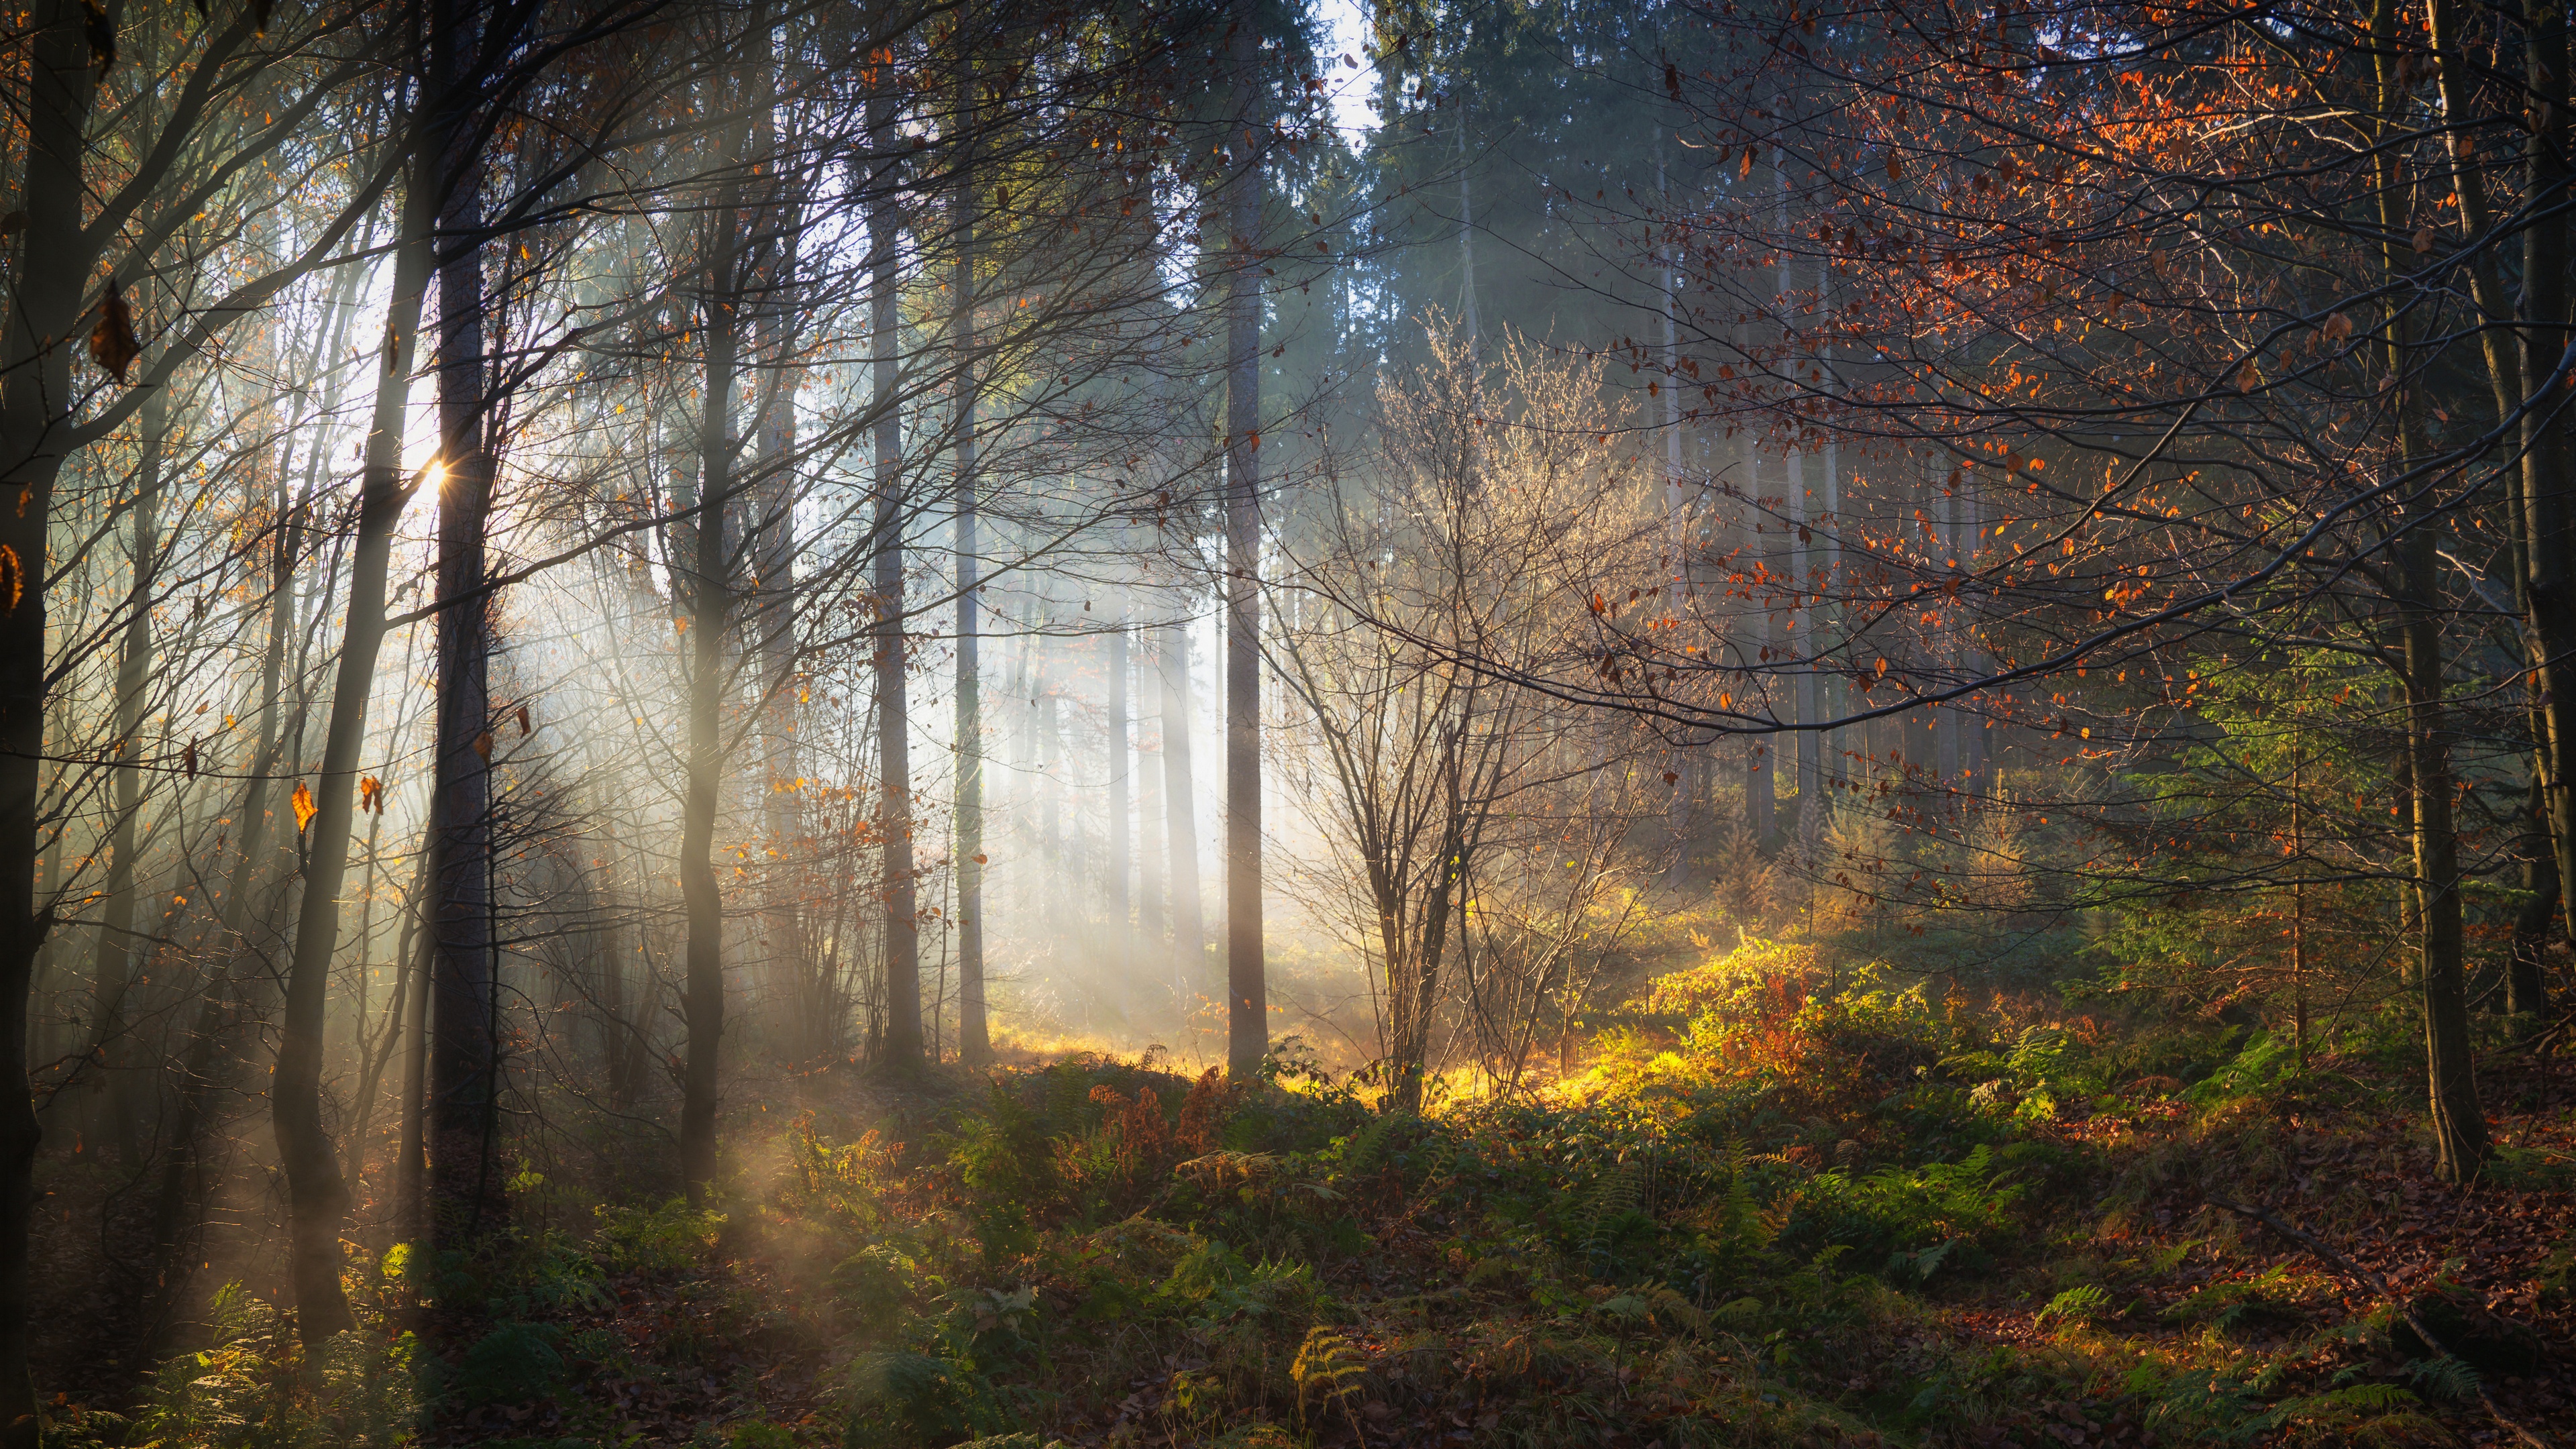 The light seeps in through the forest